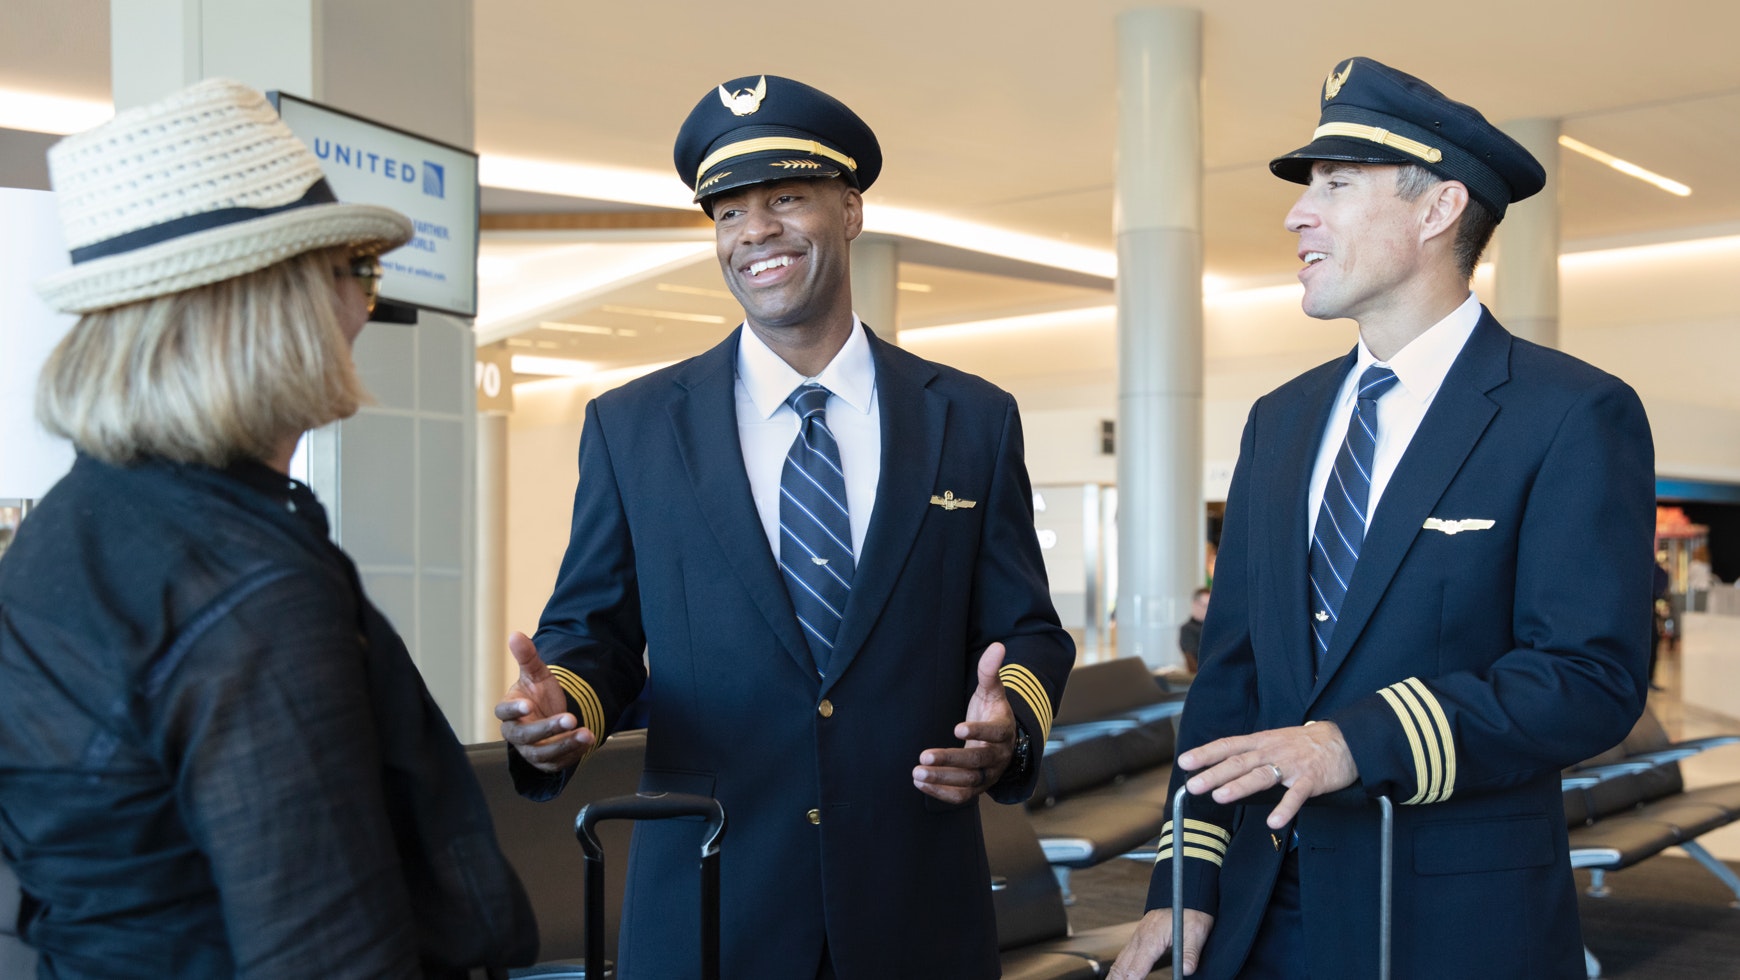 United pilots at the gate.jpg